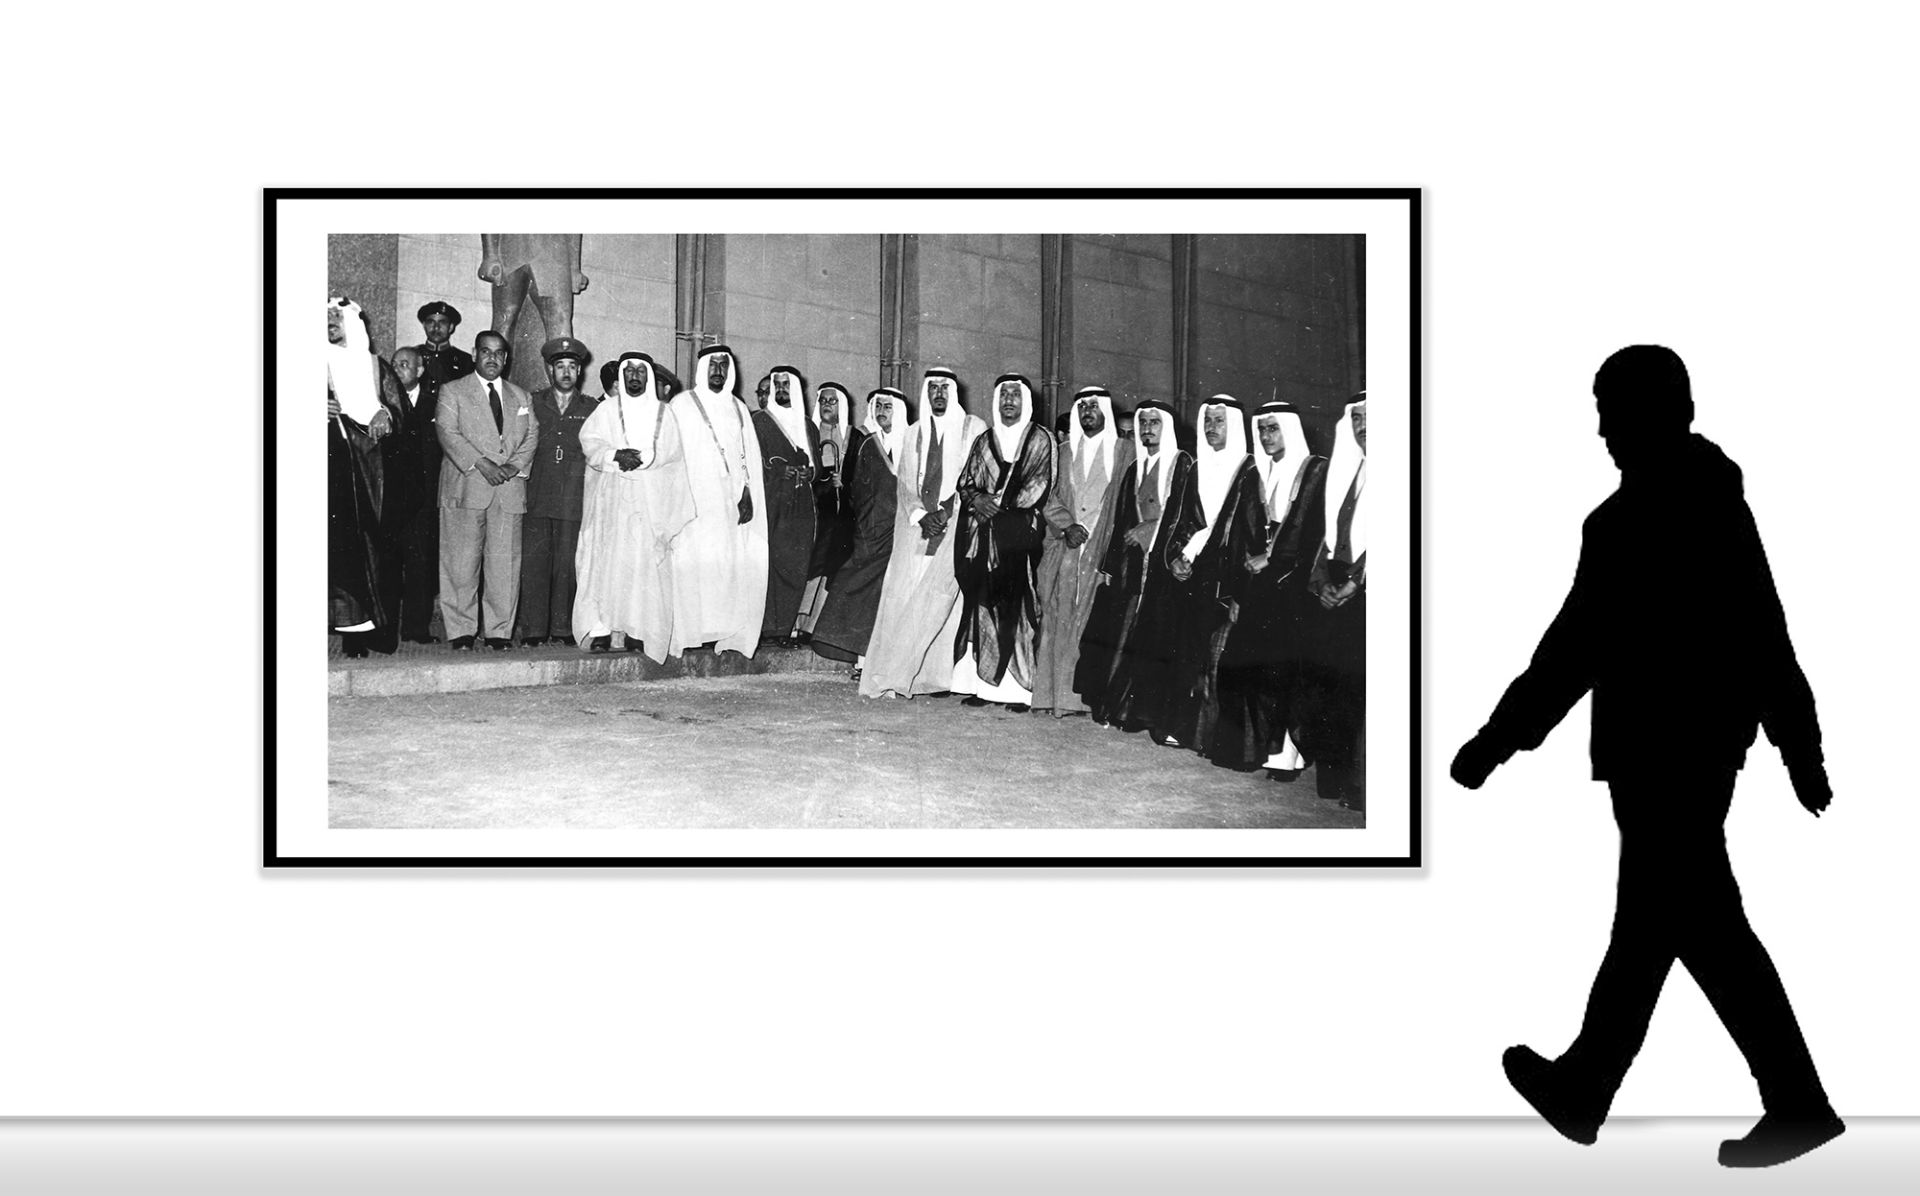 A RARE PHOTOGRAPH SHOWING KING ABDUL AZIZ’S SONS IN EYGPT - Image 2 of 3